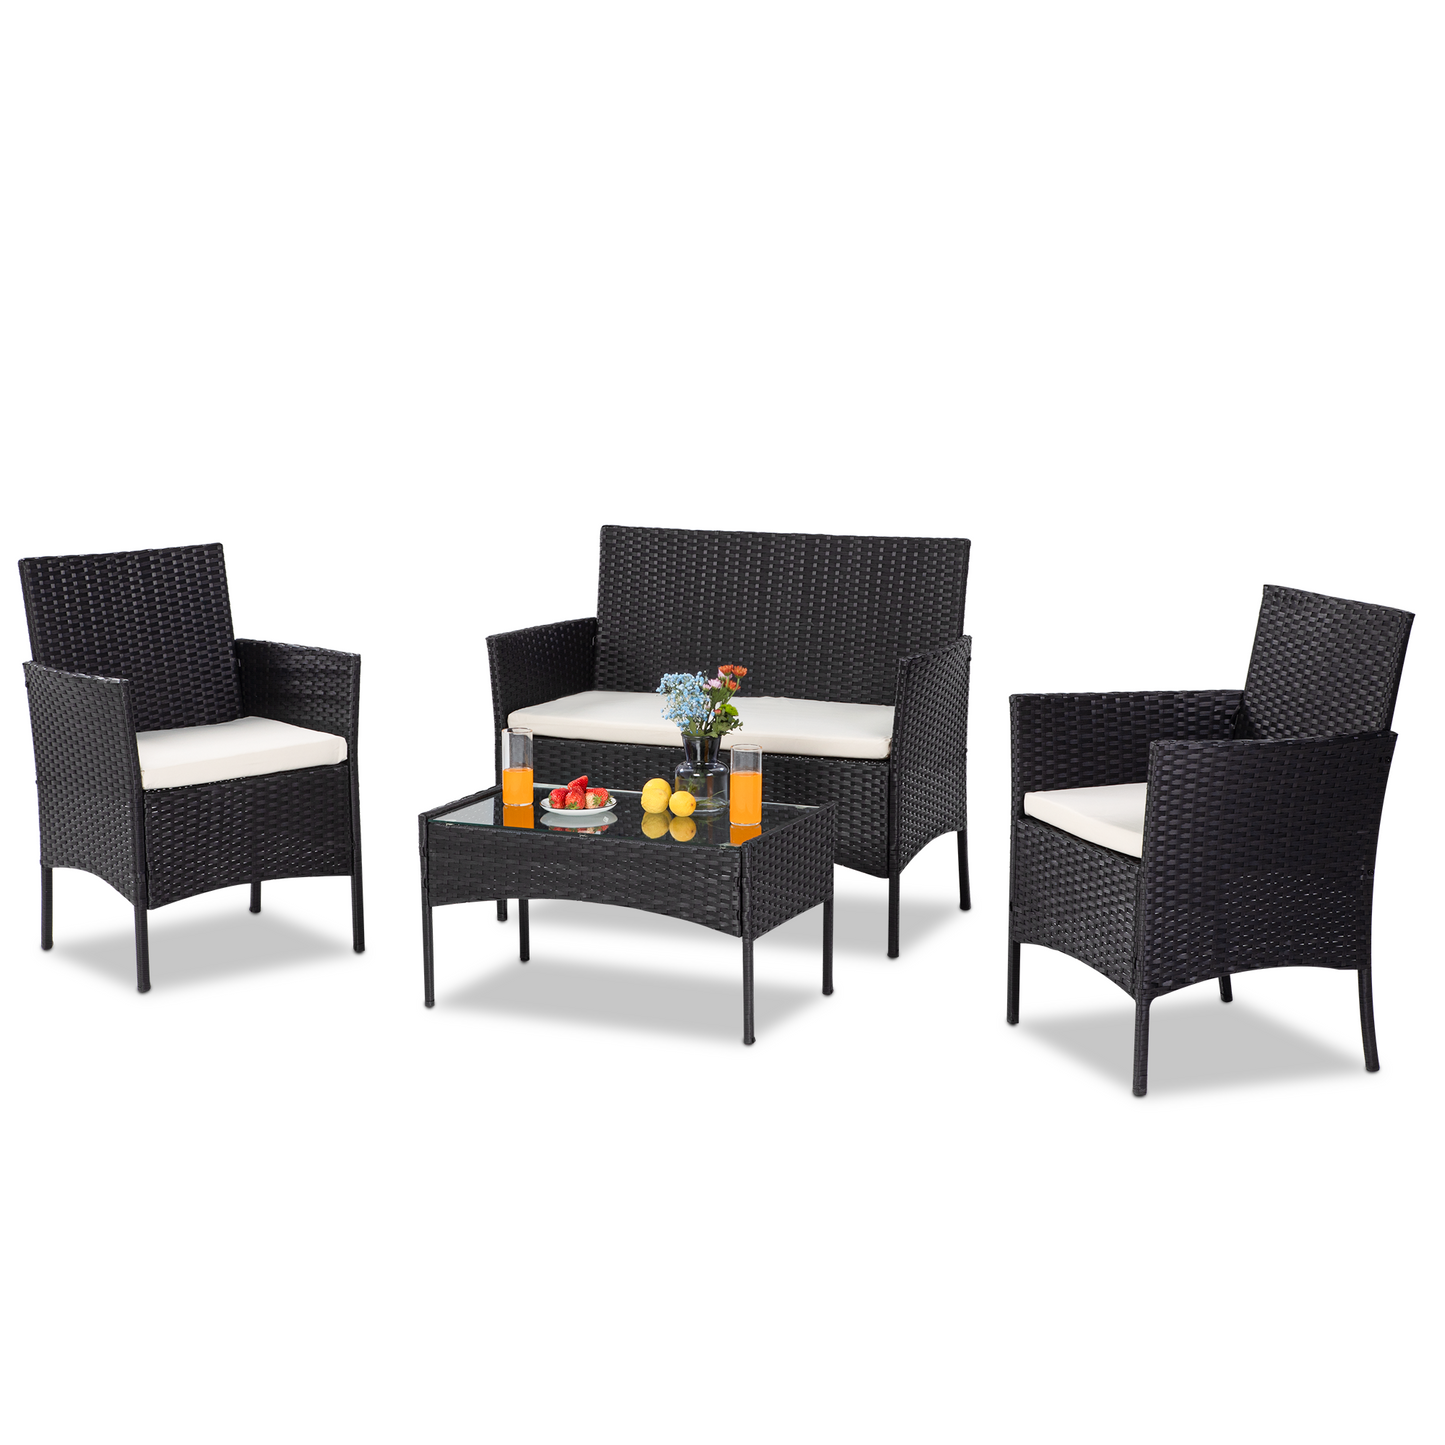 4-Piece All-Weather Wicker Patio Conversation Sets, Outdoor Furniture Sofa Couch Dining Set with Table, Chairs, Loveseat, Cushioned Seats for Garden, Lawn, Backyard, Front Porch, Brown